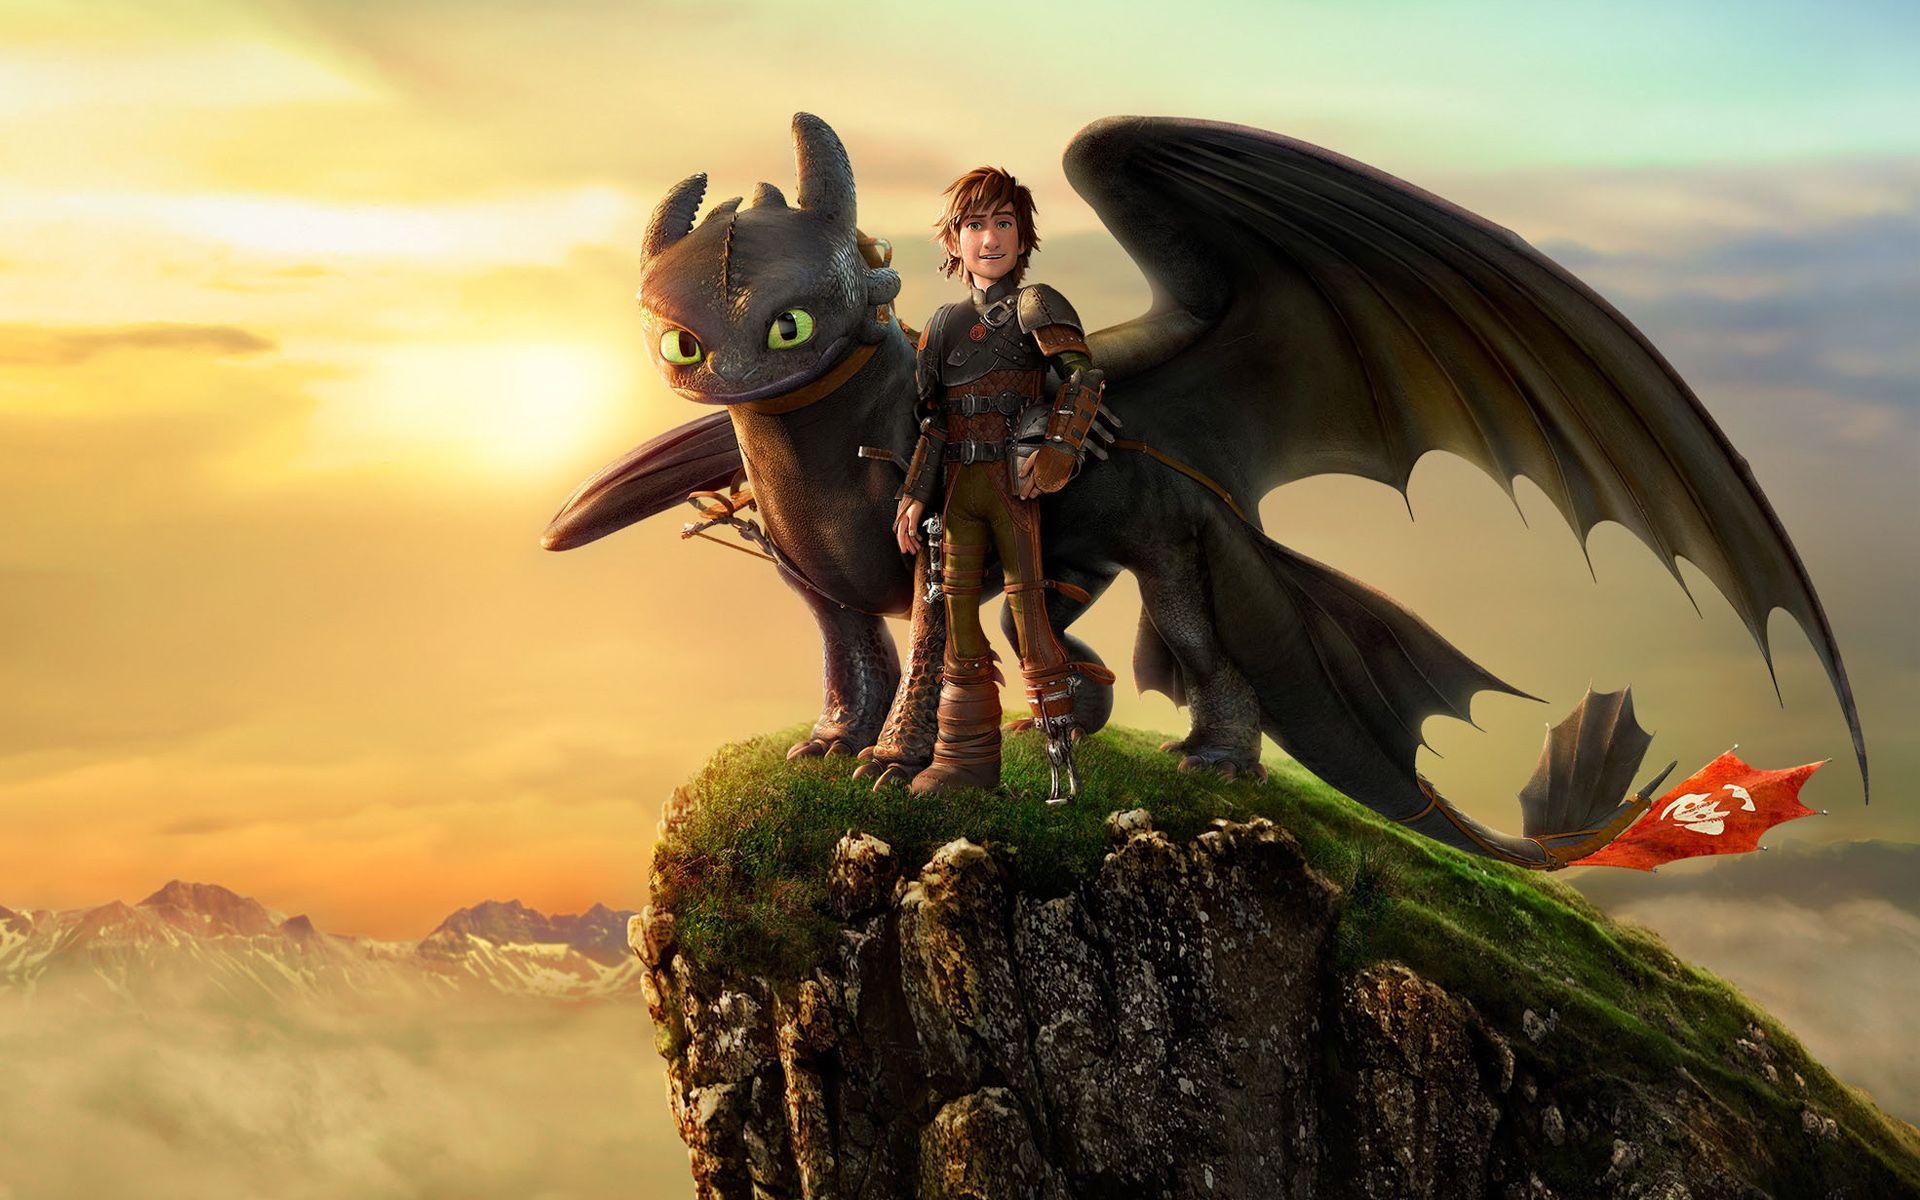 HD How to Train Your Dragon Movie Wallpaper